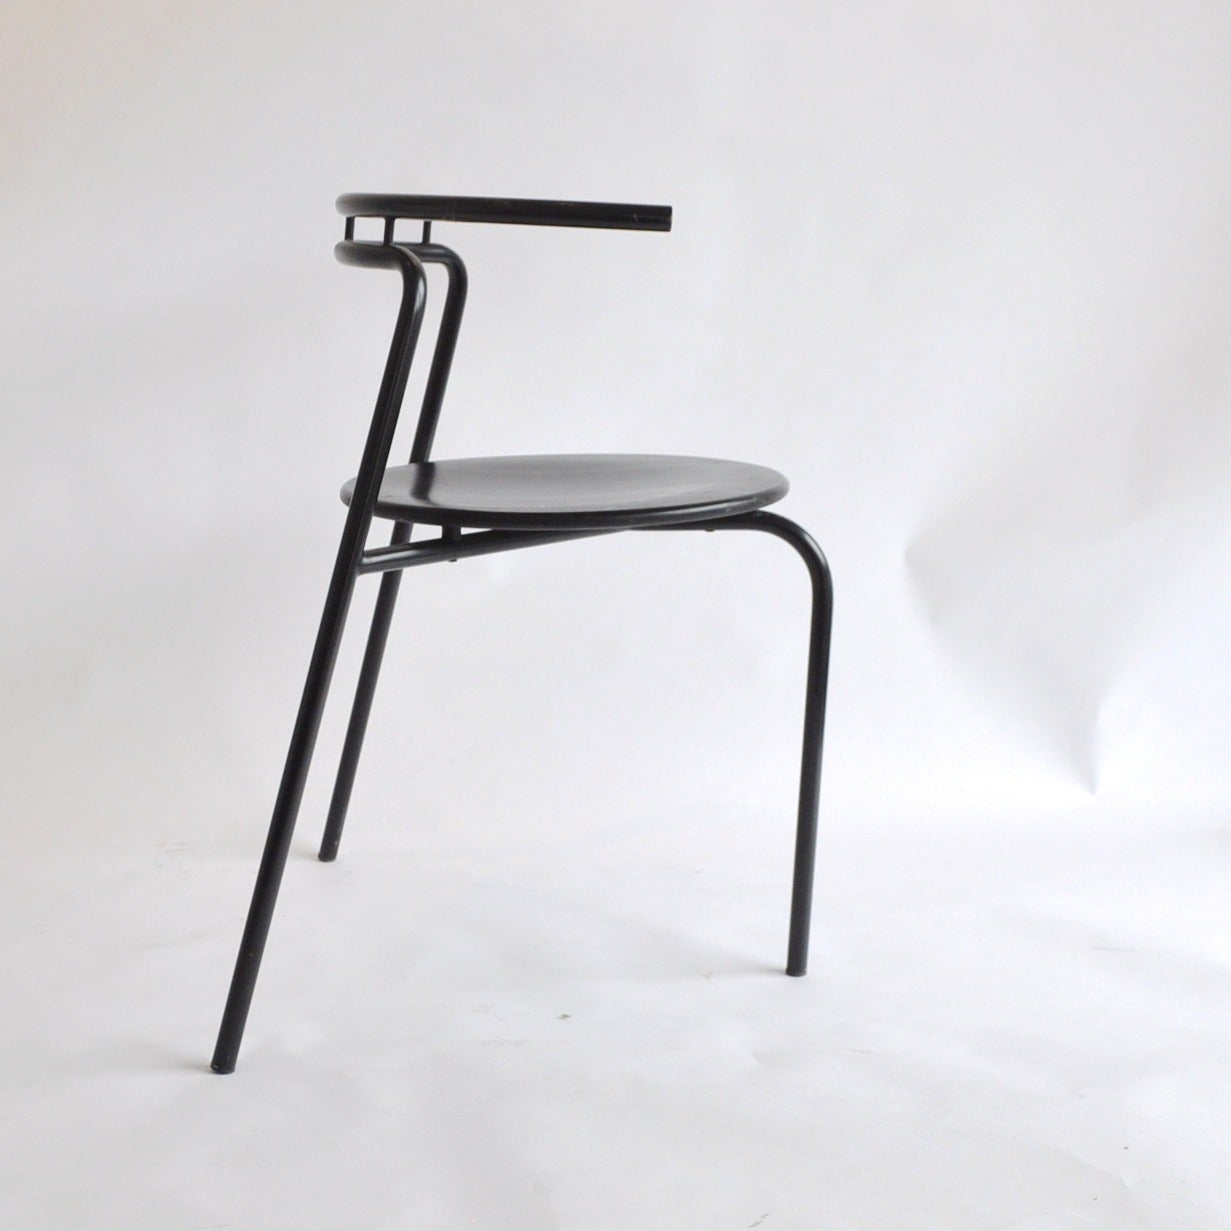 Rare Ross Littell Three-Legged Chair In Good Condition For Sale In New London, CT